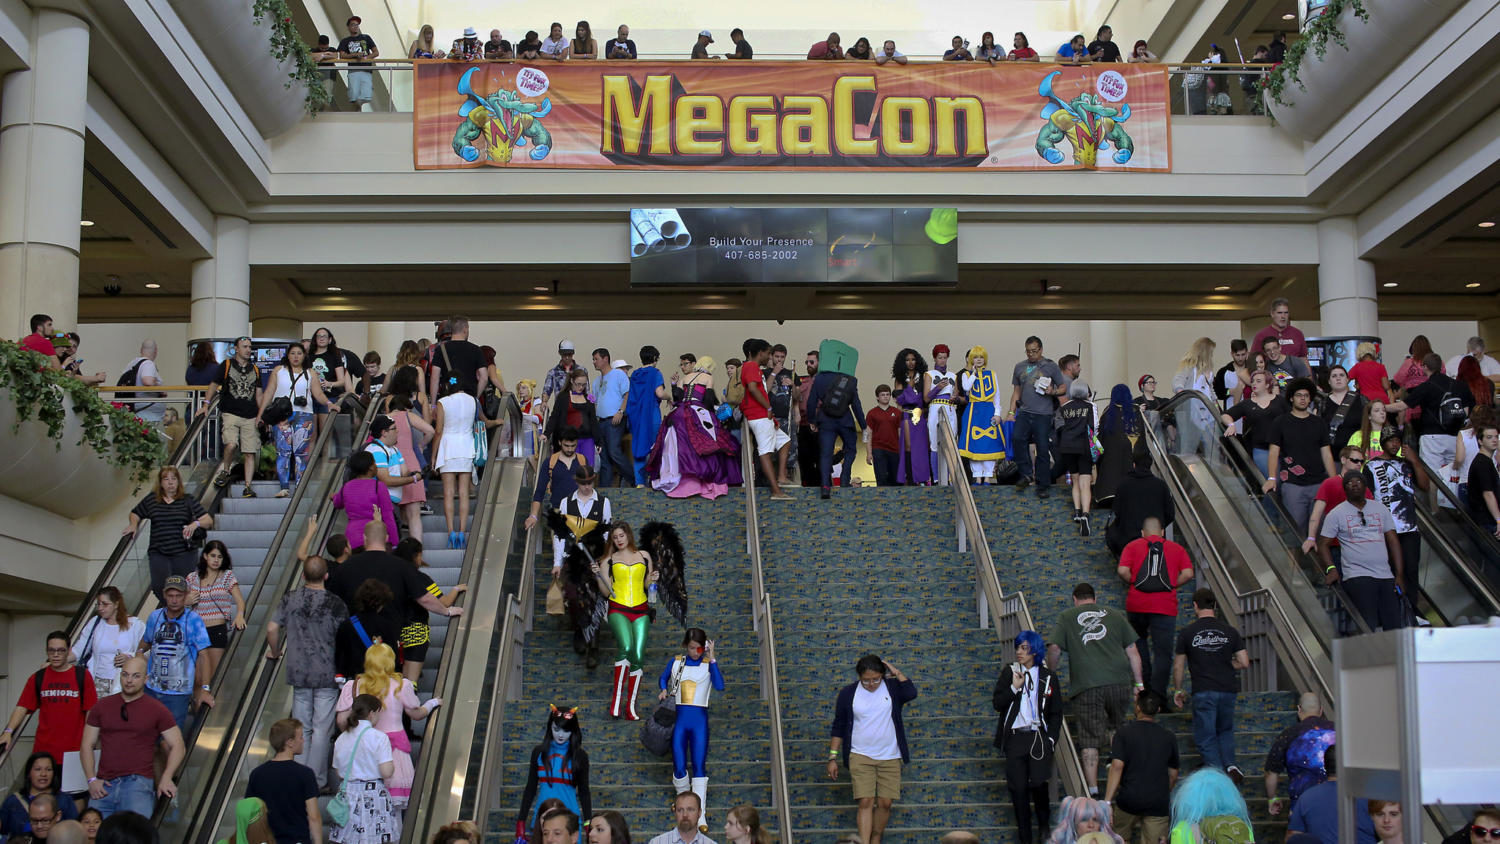 Megacon will be arriving to the Orange County Convention Center on May 25th and will end on May 28th.